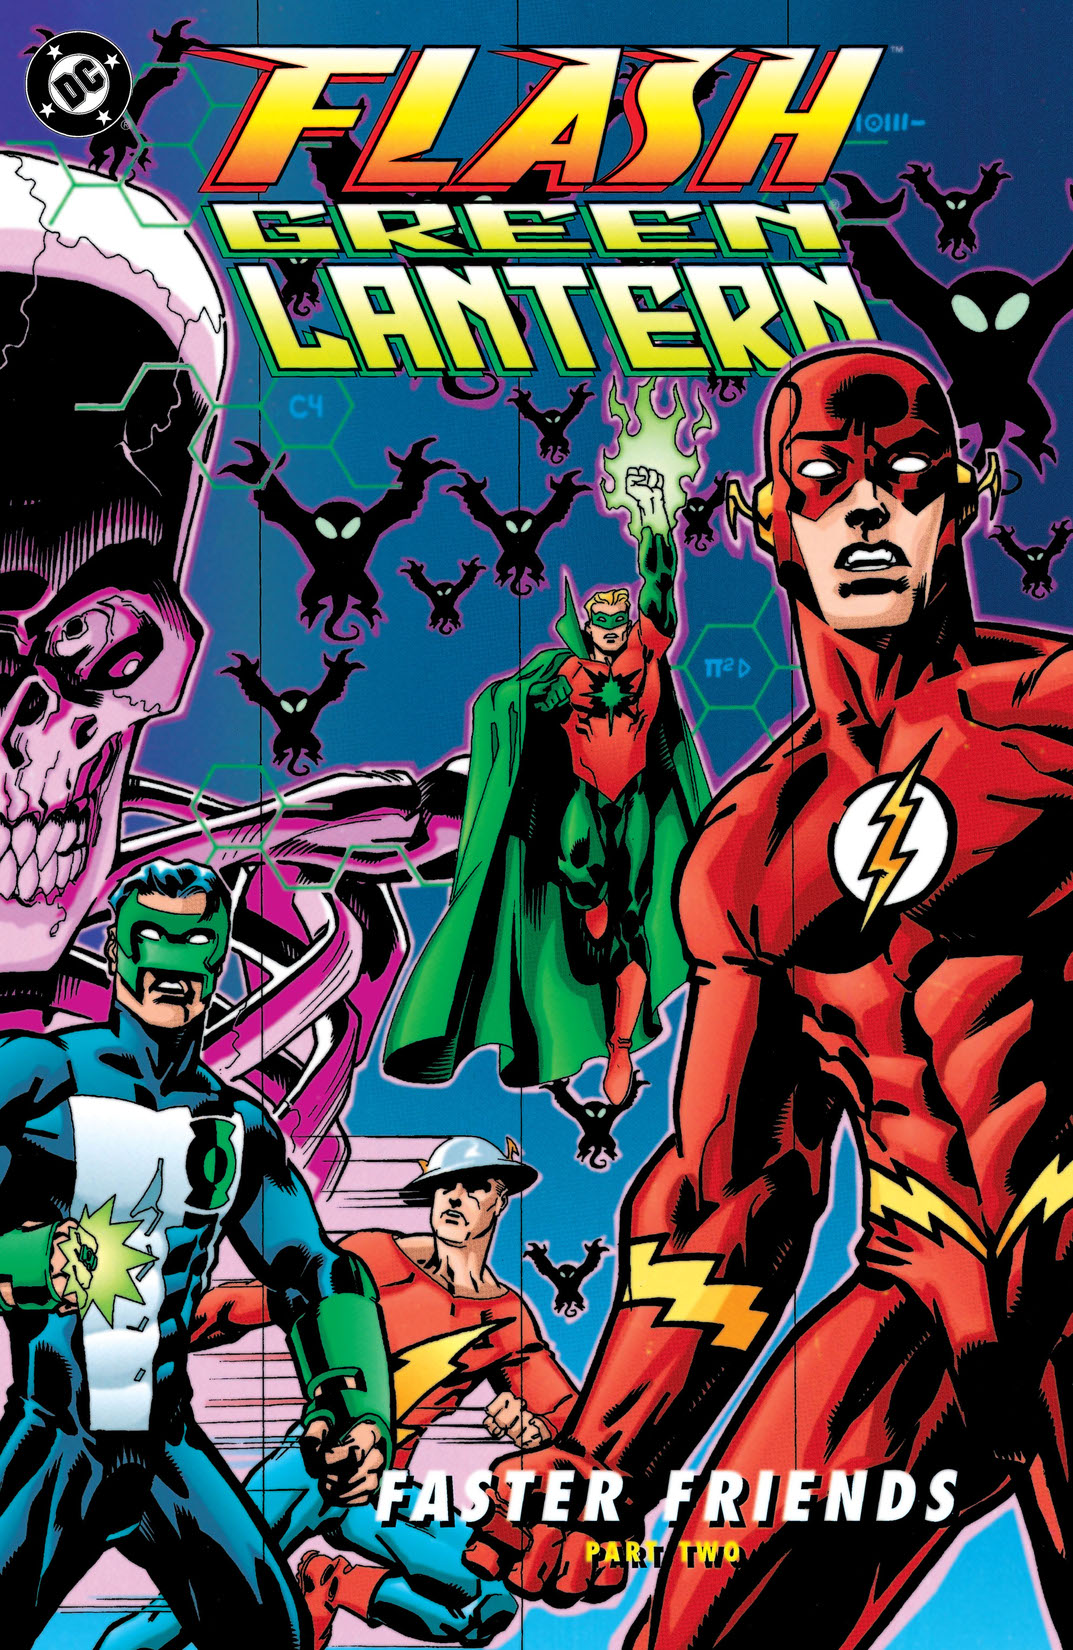 Flash/Green Lantern: Faster Friends Part 2 #2 preview images